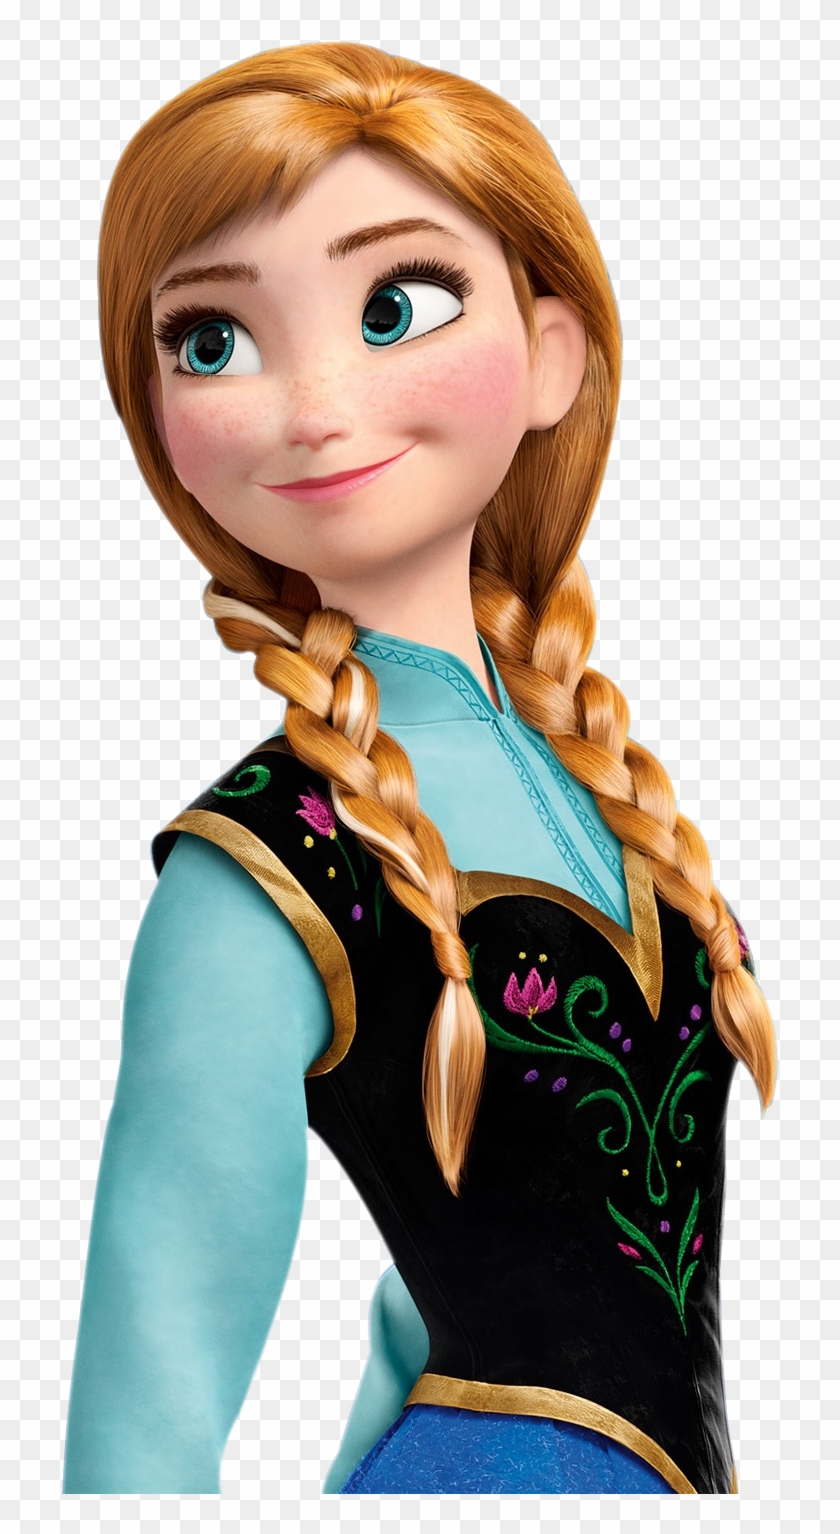 If You Like You Can Get Other Images Of Frozen Movie - Animated Movie Girl Characters Clipart